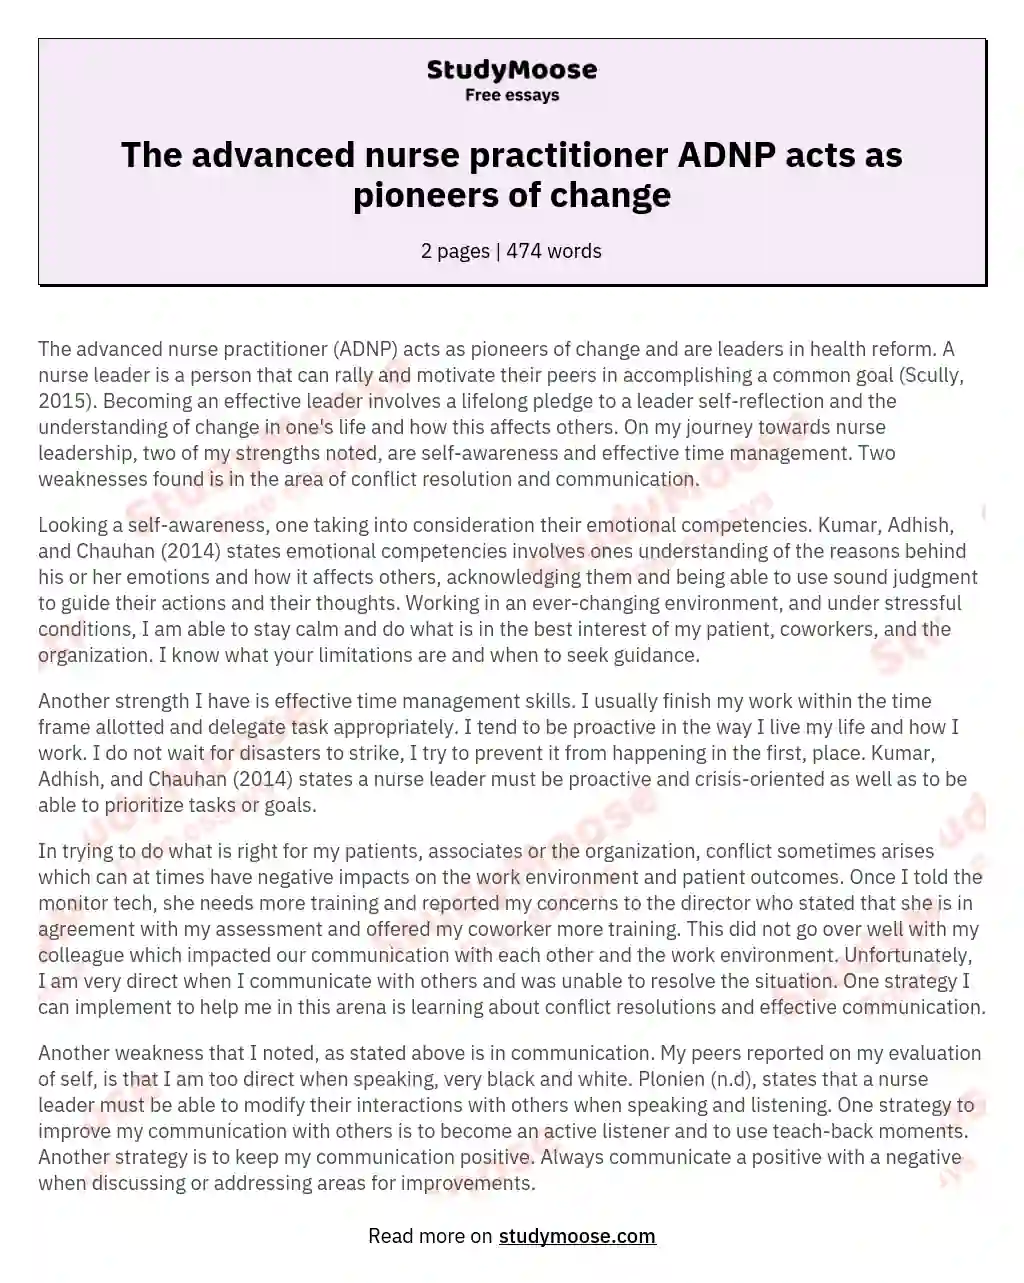 The advanced nurse practitioner ADNP acts as pioneers of change